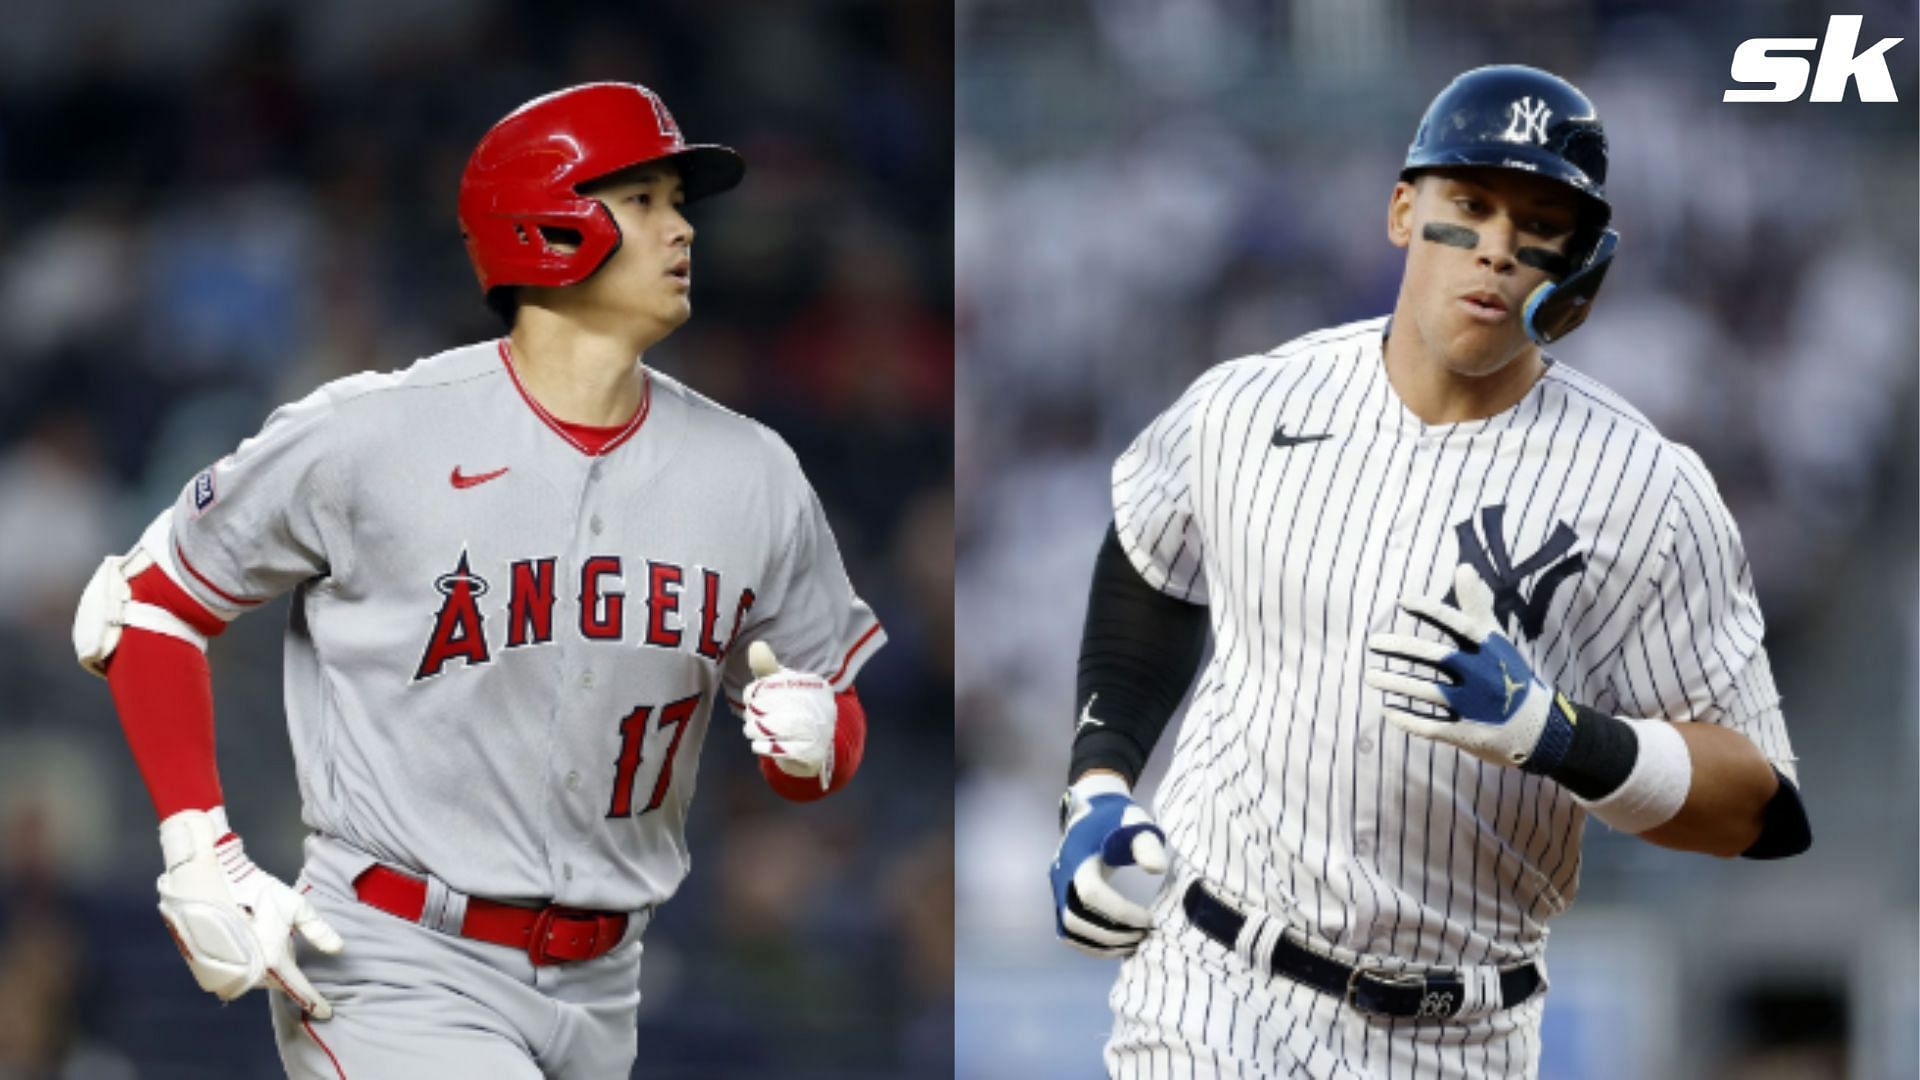 Aaron Judge #99 of the New York Yankees rounds the bases after hitting a two-run home run during the first inning against the Los Angeles Angels &amp; Shohei Ohtani #17 of the Los Angeles Angels runs to first during the third inning against the New York Yankees at Yankee Stadium